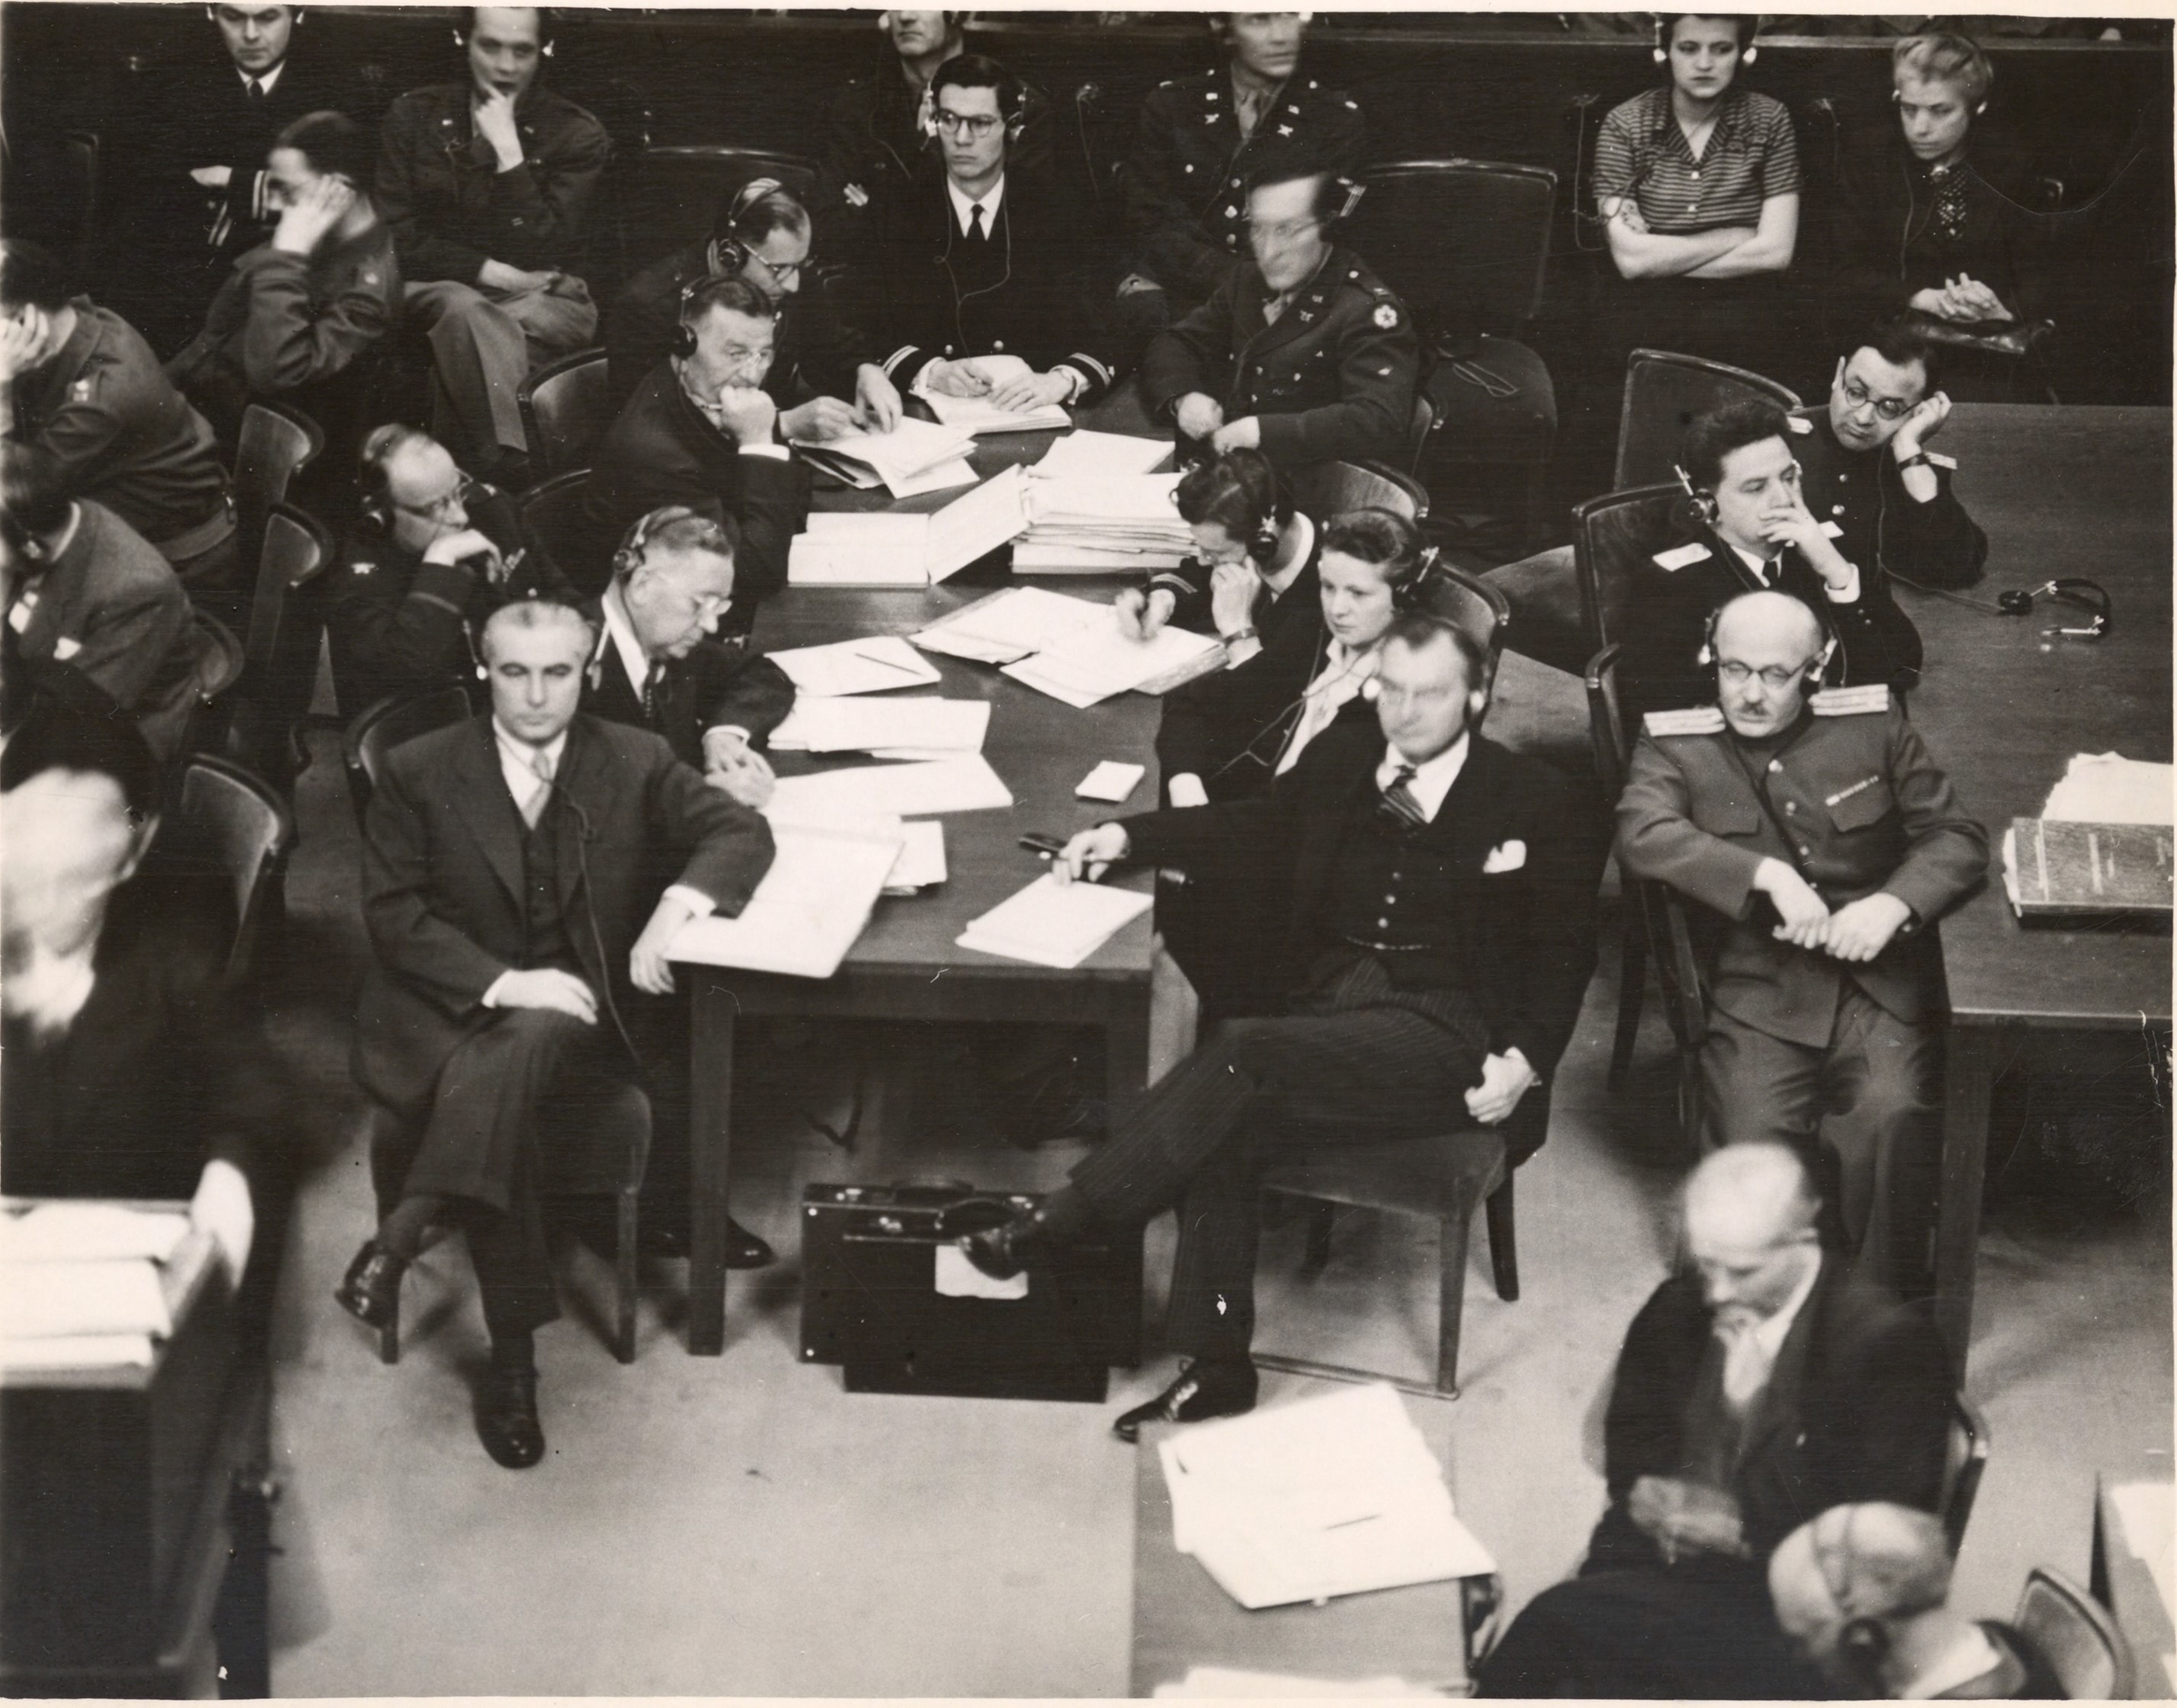 Thomas J. Dodd, front left, executive trial counsel, and Robert Jackson, front right, chief U.S. prosecutor and associate justice of the Supreme Court of the United States at the International Military Tribunal in Nuremberg. (Thomas J. Dodd Papers, Archives & Special Collections at the Thomas J. Dodd Research Center, University of Connecticut Libraries)